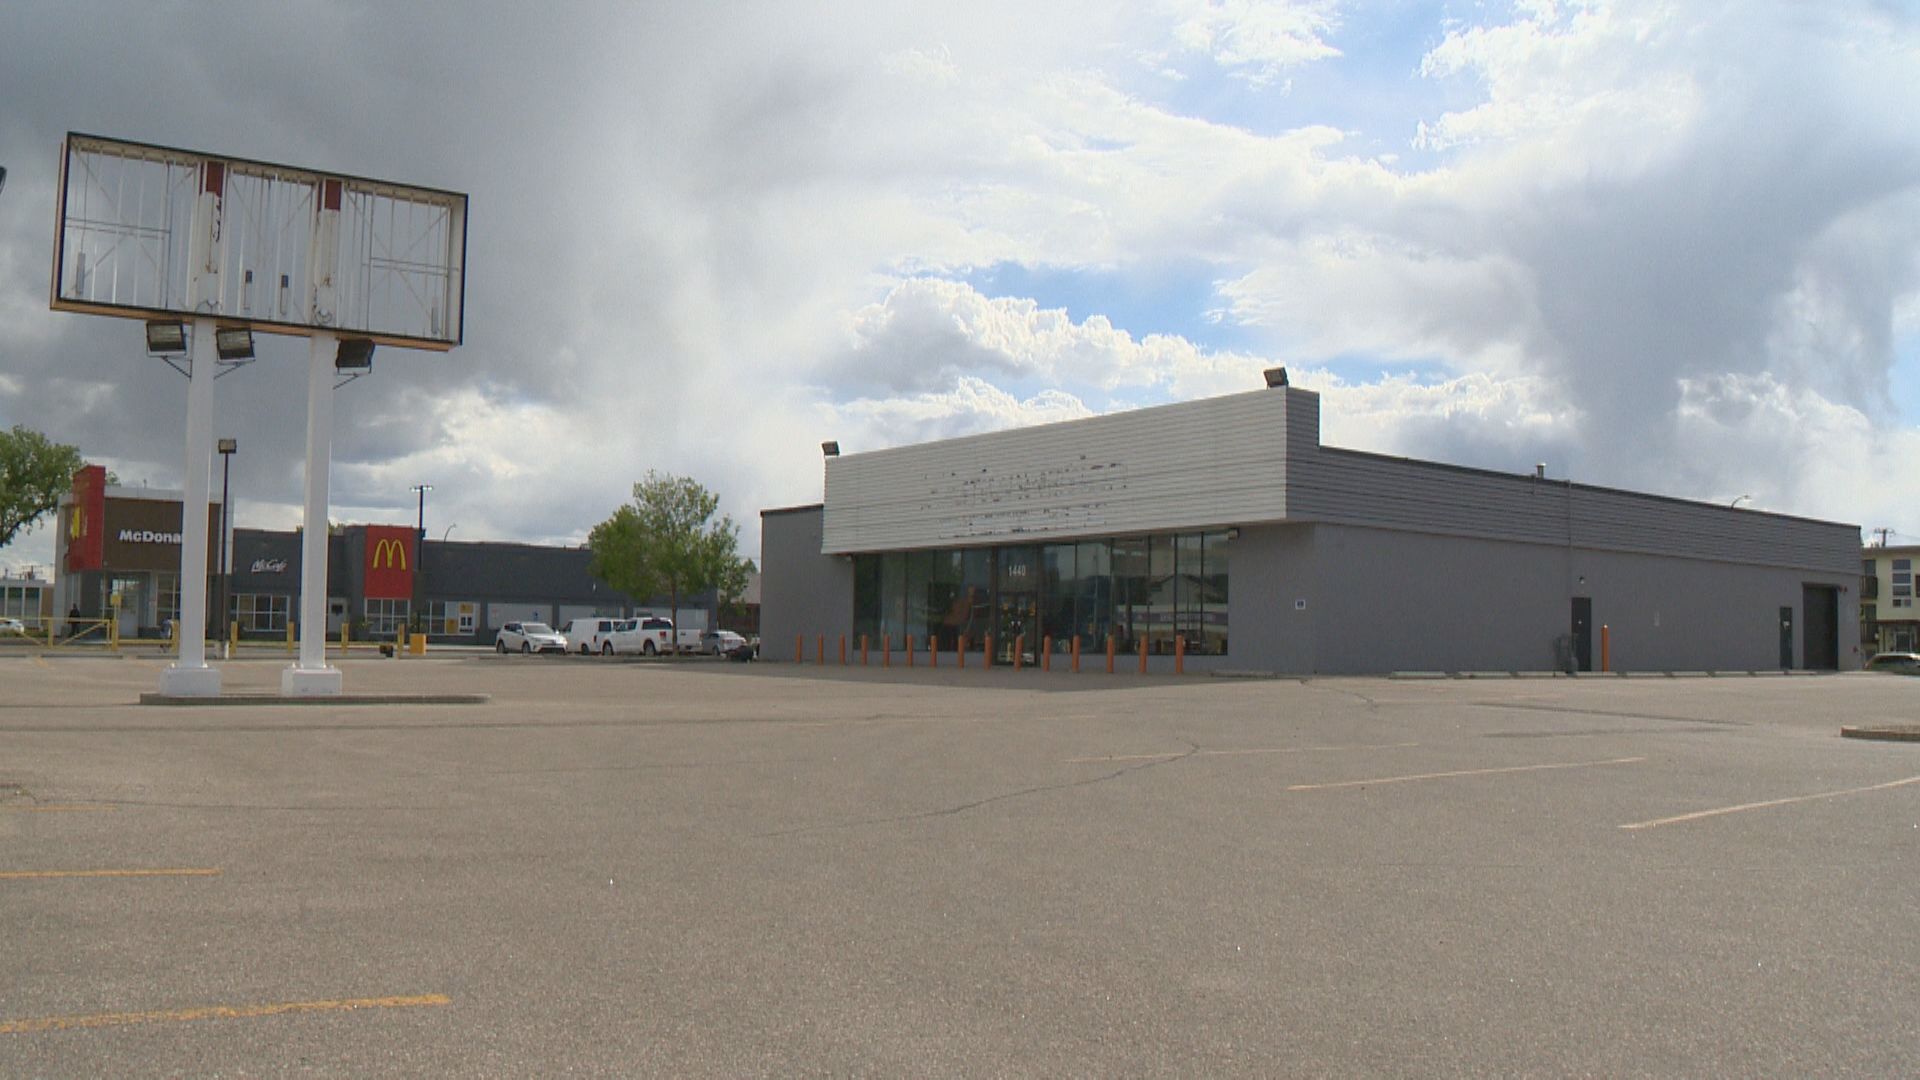 ‘We need more spaces’: Regina reacts to proposed North Central emergency shelter